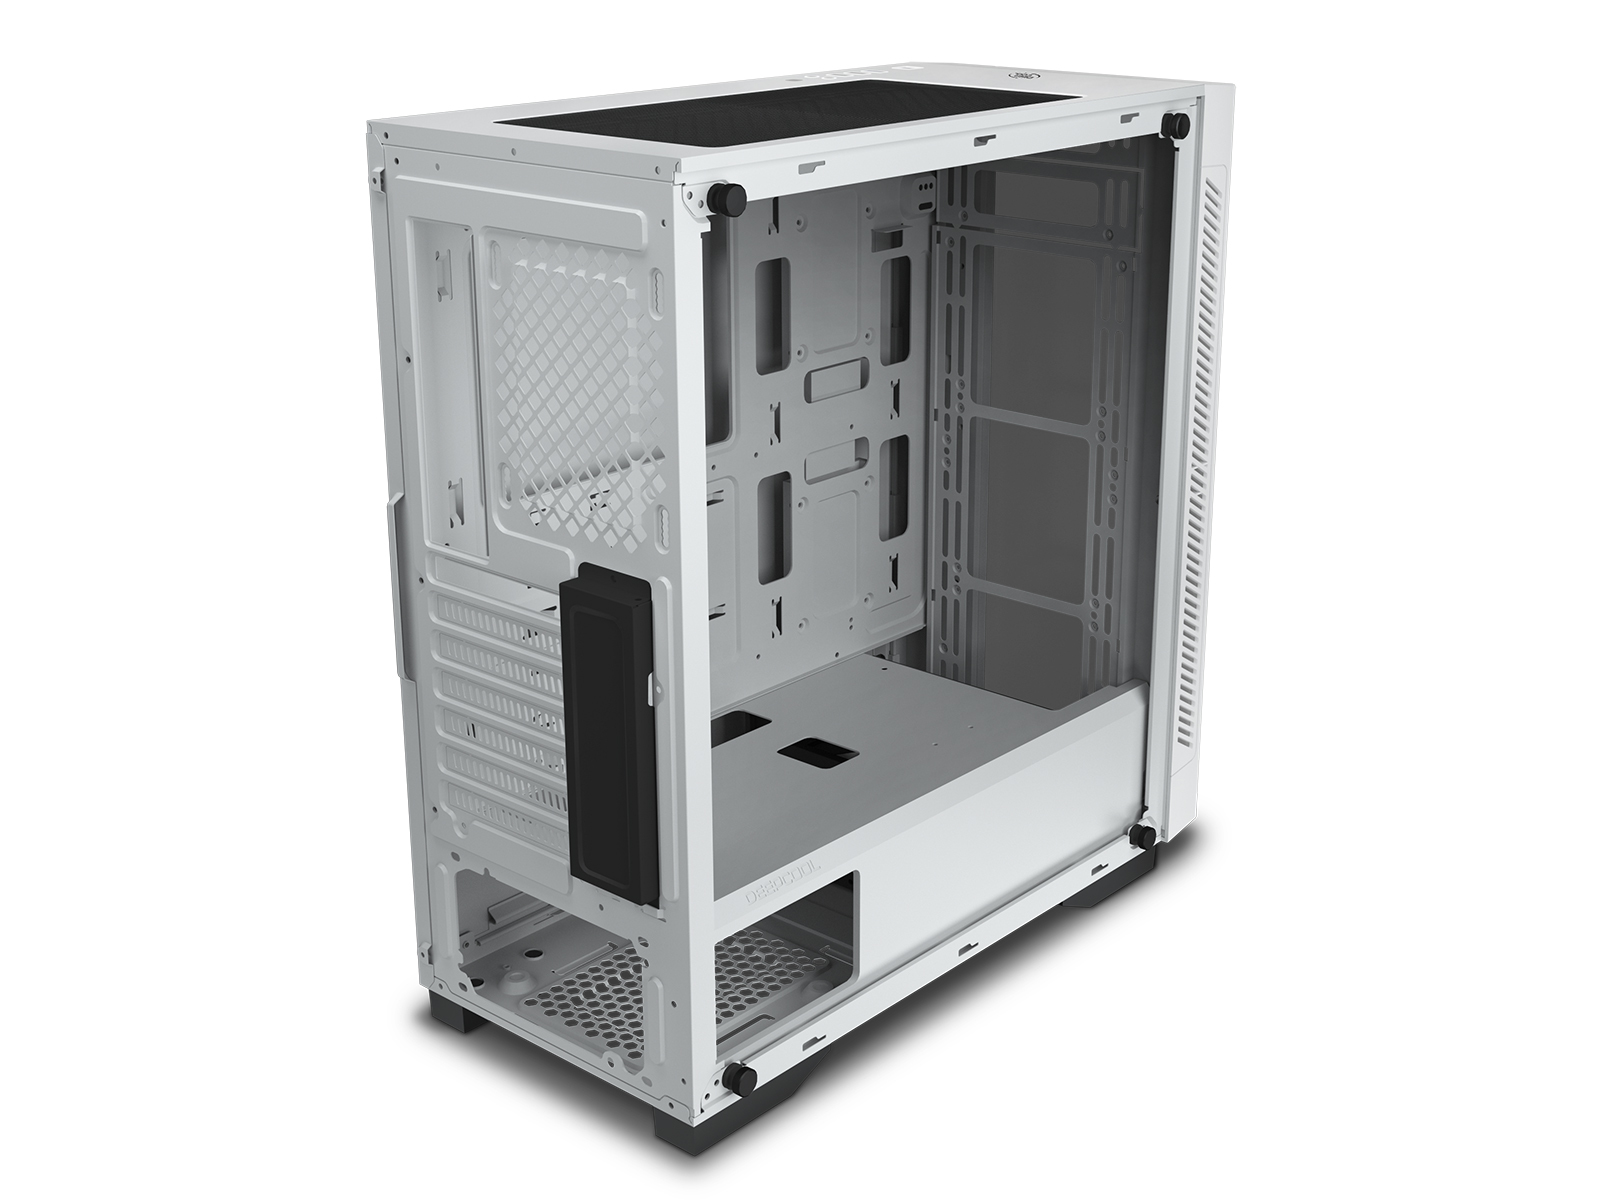 DeepCool MATREXX 55 V3 ADD-RGB 3F Mid-Tower ATX White PC Case, 3x Pre-Installed 120mm ARGB Fans,Tempered Glass Front with Pre-Installed ARGB Strip and Side Panel, 5V ARGB Motherboard Control, 1xUSB:3.0/1x USB:2.0/1xAudio/1xMic